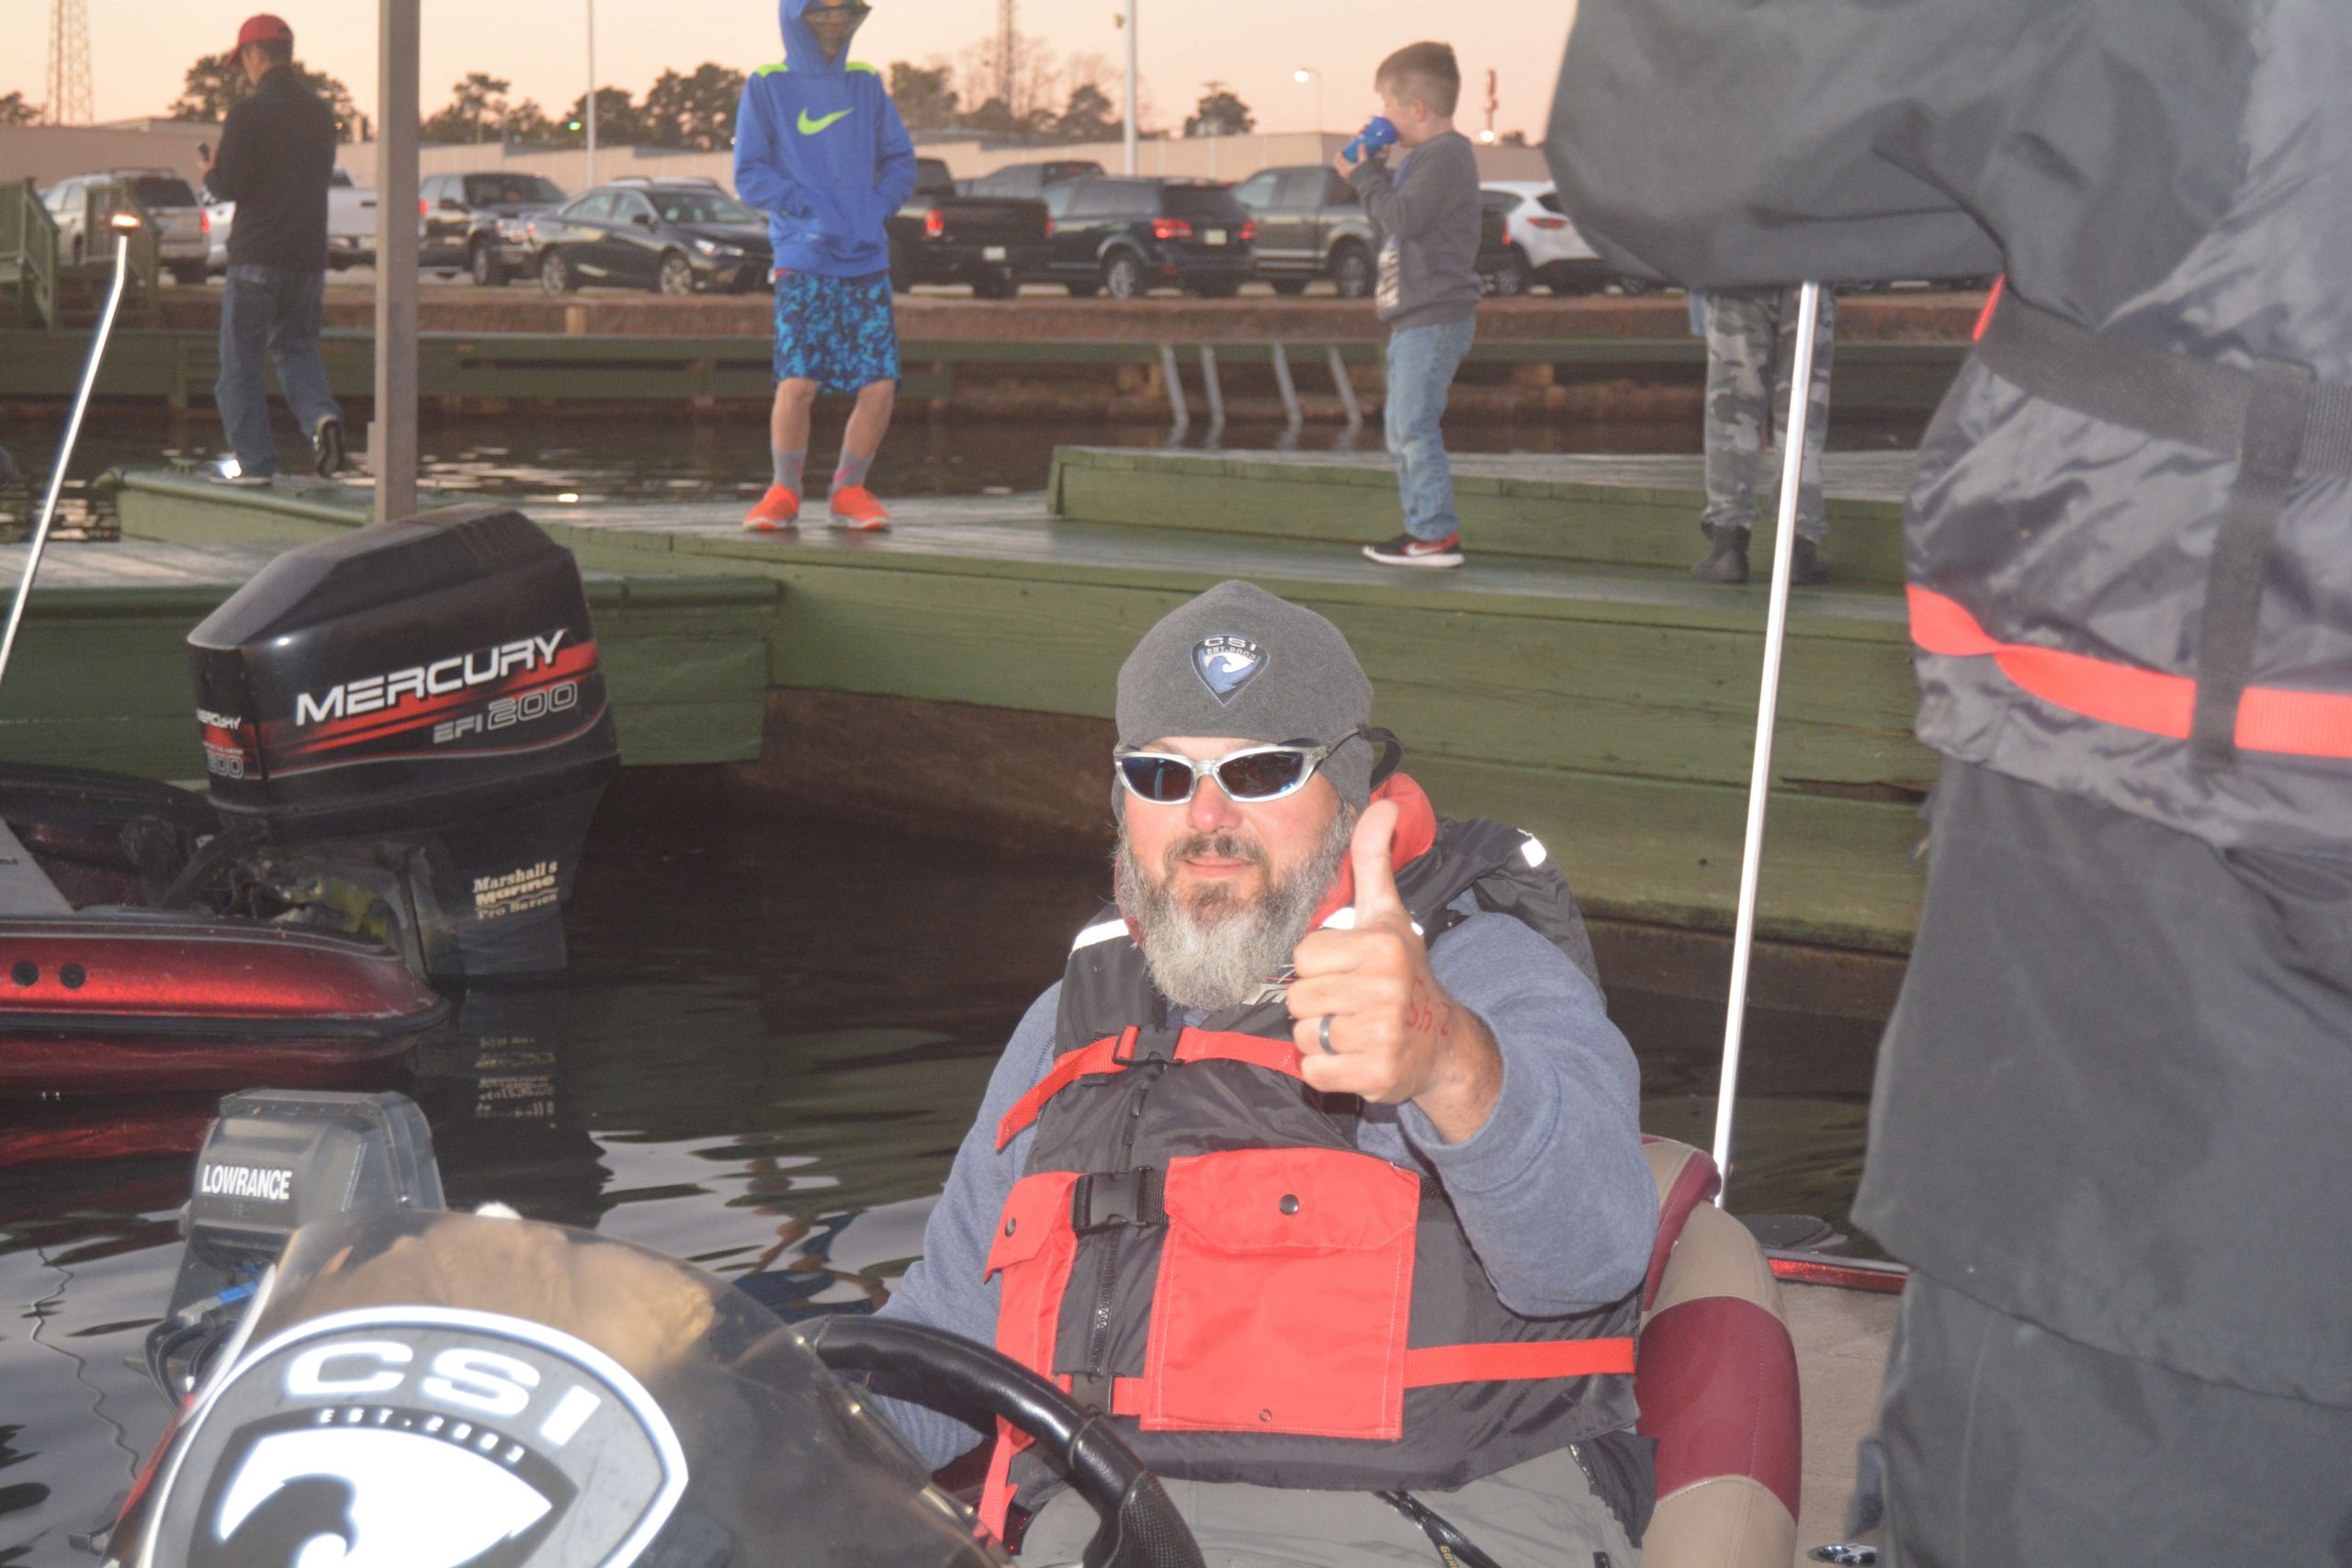 JJ Dickens of West Virginia would have been the first angler out of the cut for Classic berths if the final day had been cancelled yesterday. Now that he gets to fish today, he's ready to make it happen.